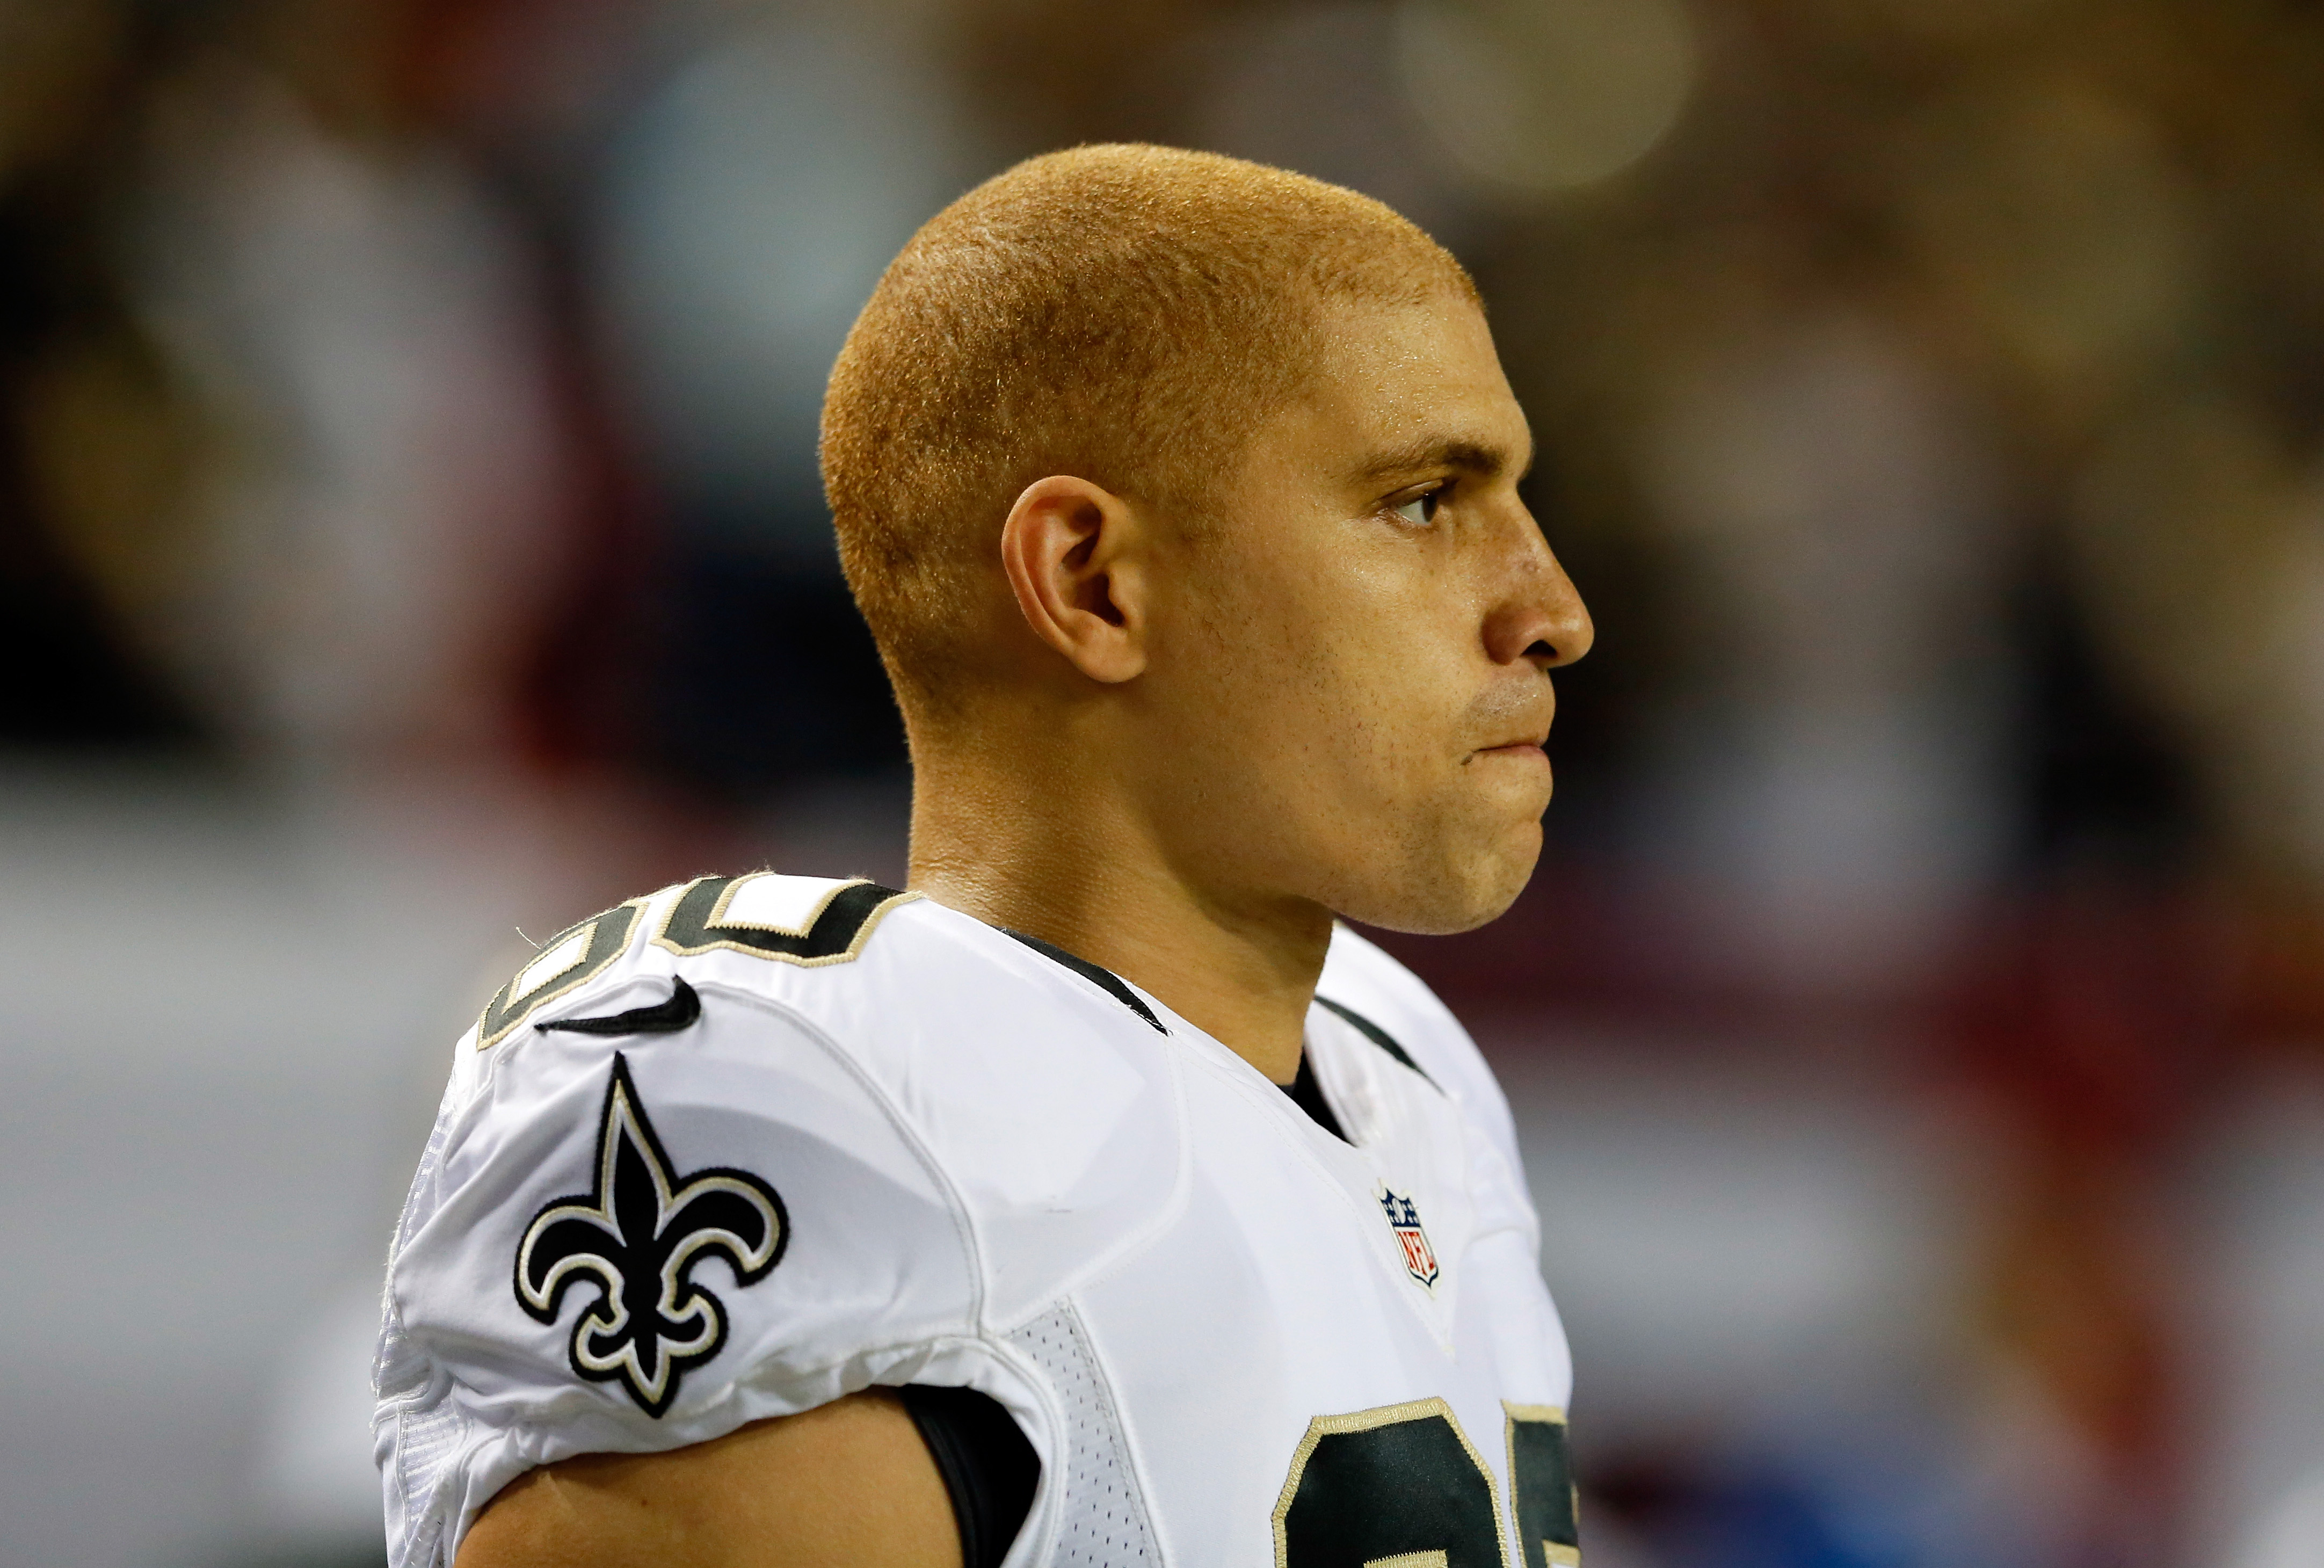 Jimmy Graham returns to Saints on one-year deal